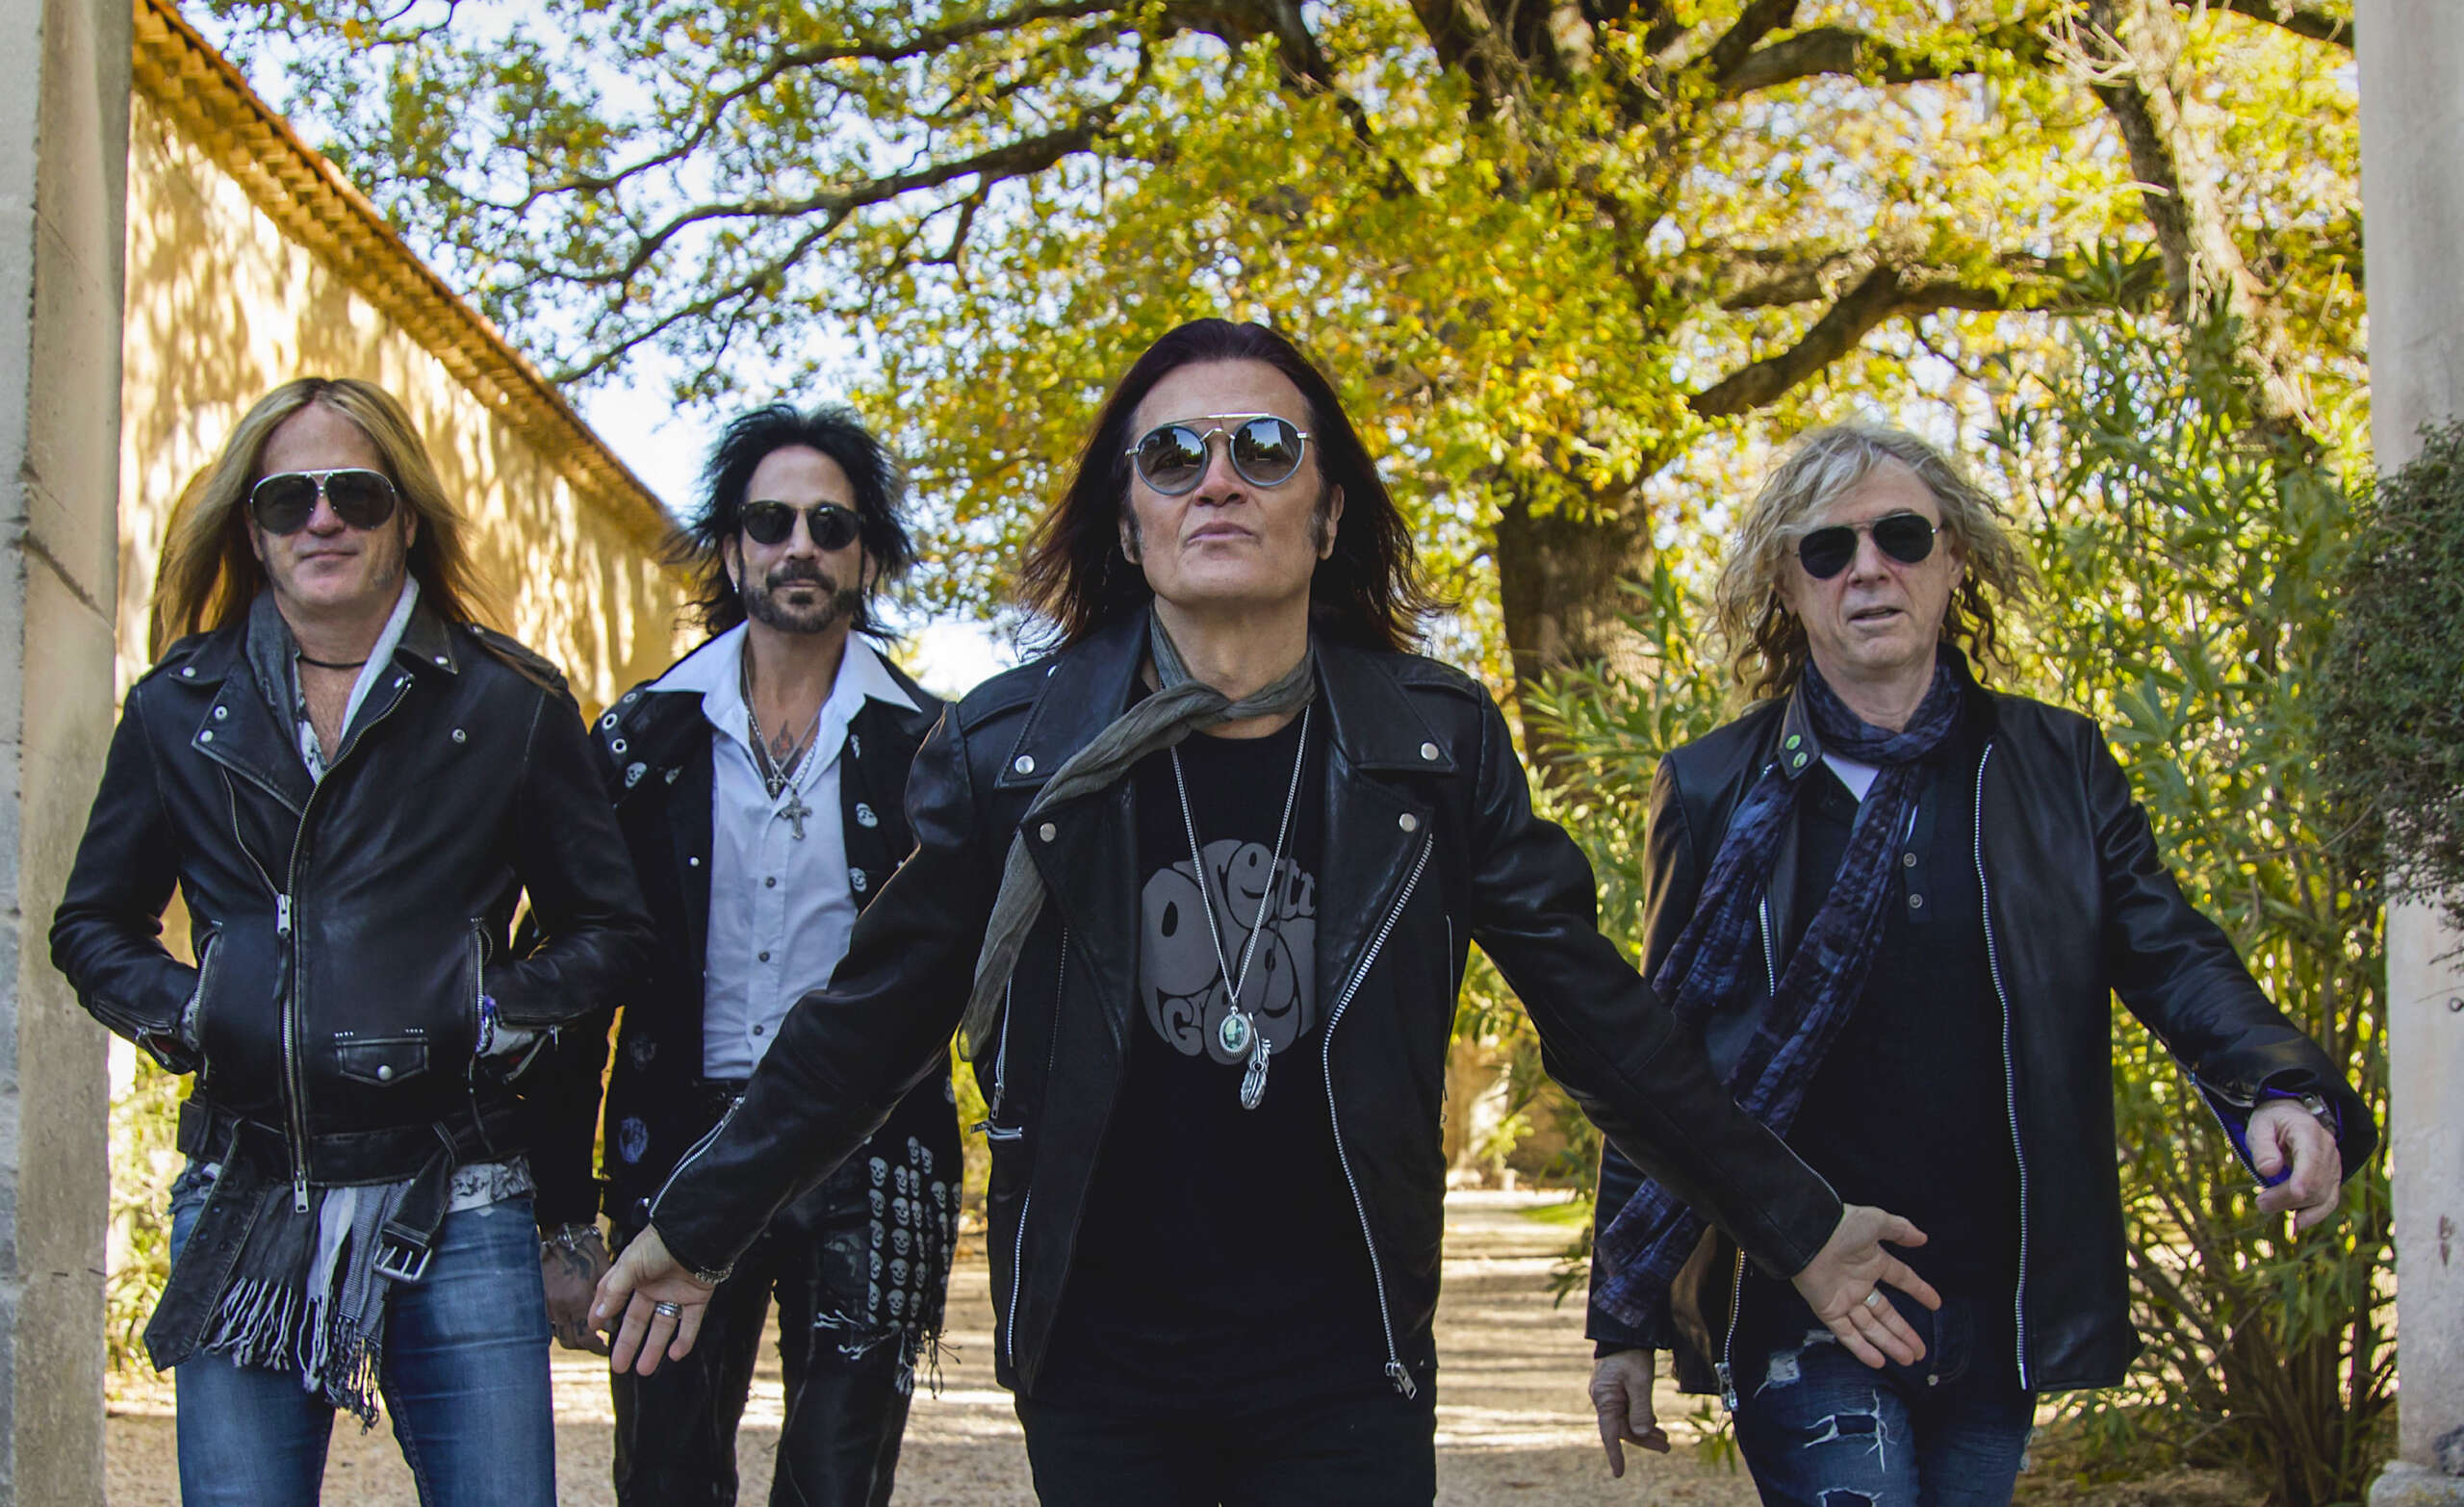 THE DEAD DAISIES – tour invernale in UK e nuovo singolo “Born To Fly”!